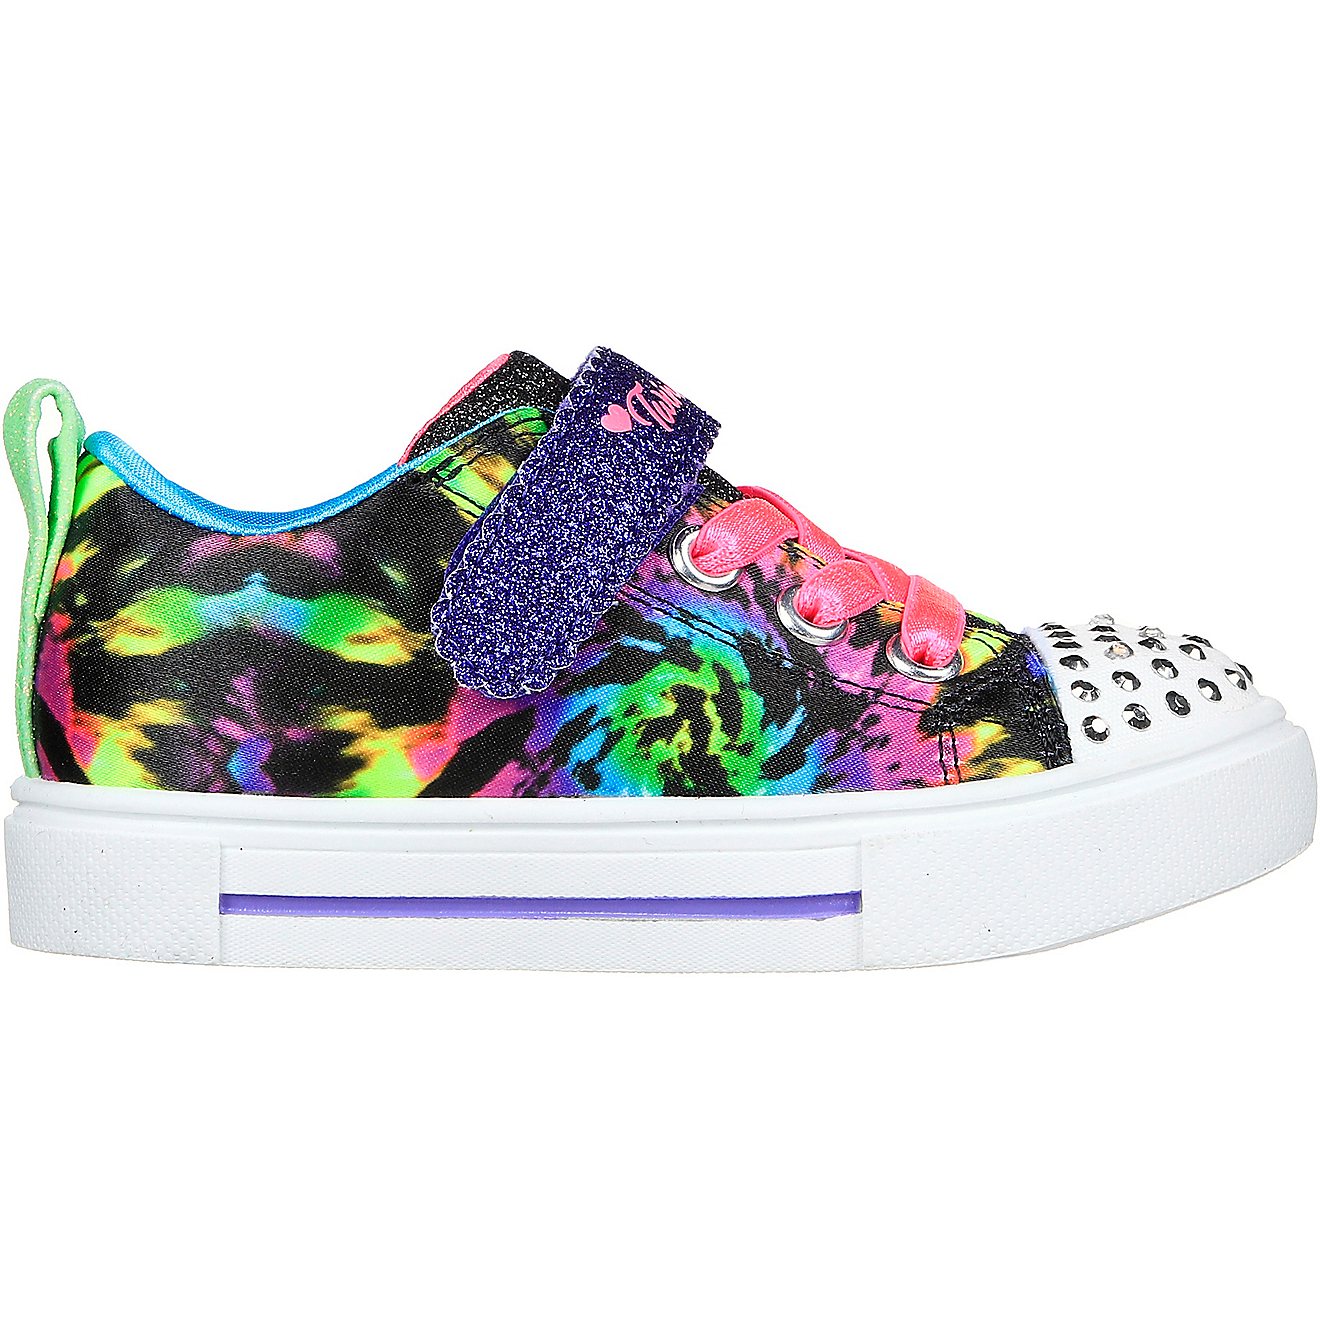 SKECHERS Girls’ 4-7 Twinkle Sparks Stormy Brights Shoes                                                                        - view number 1